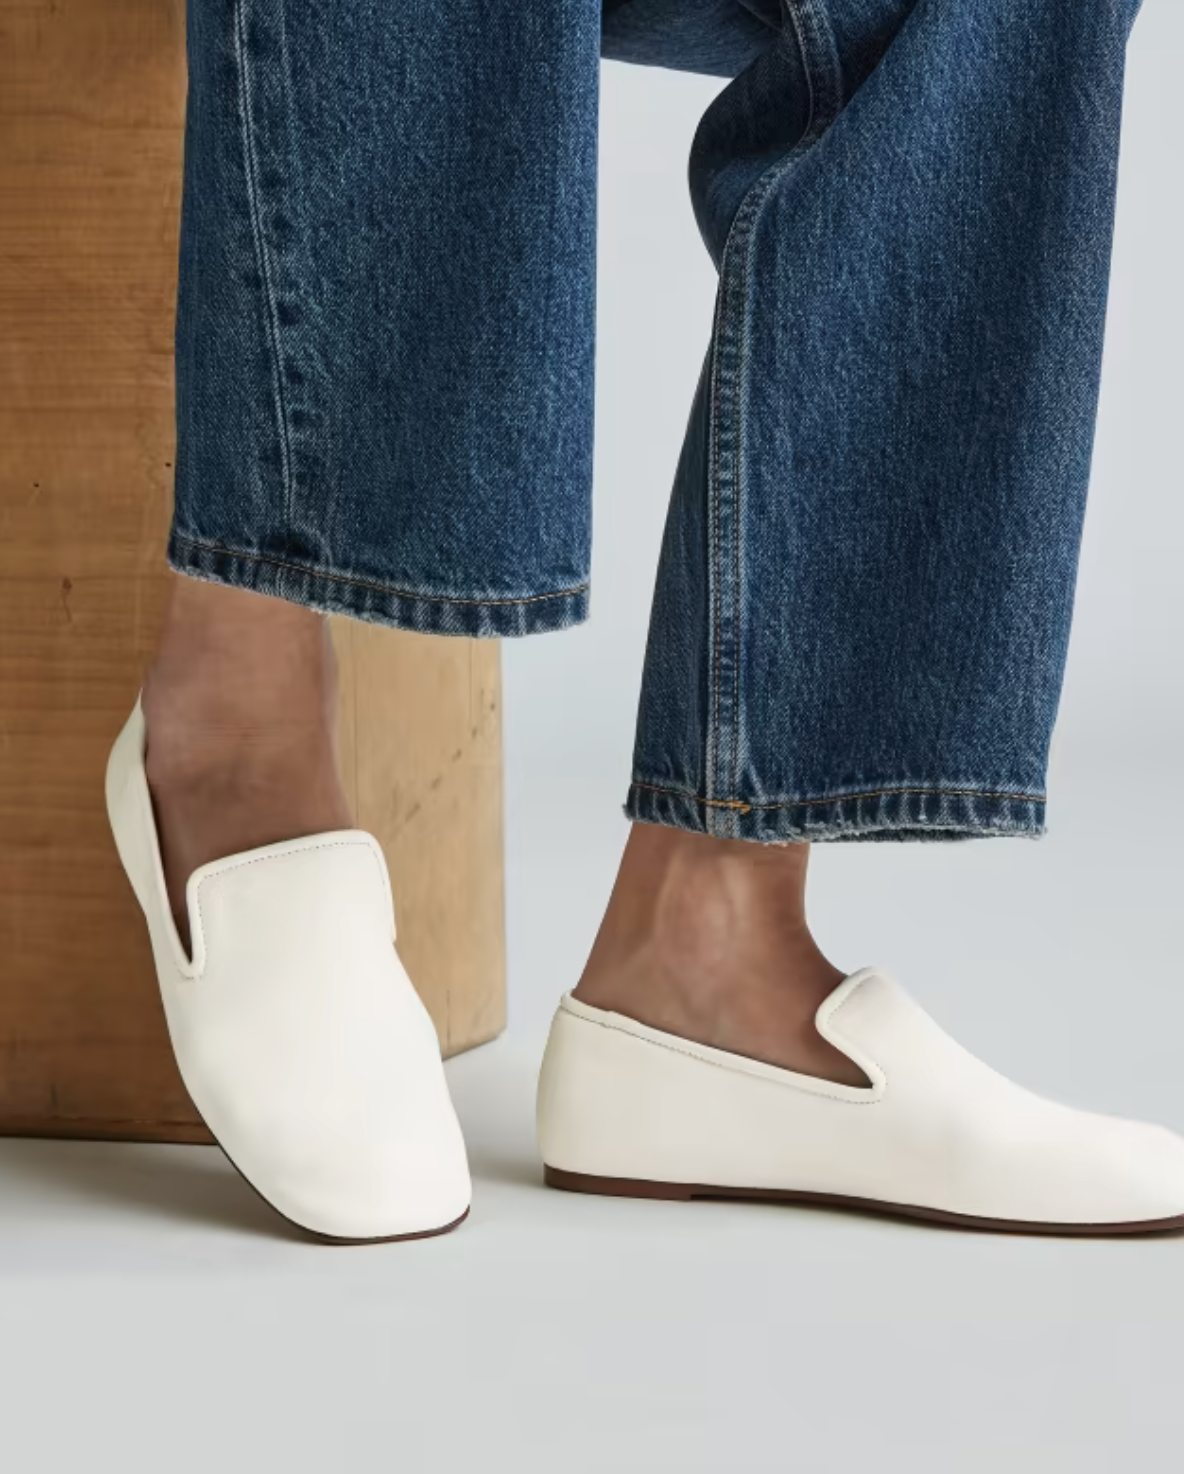 A model wearing Everlane sustainable loafers.